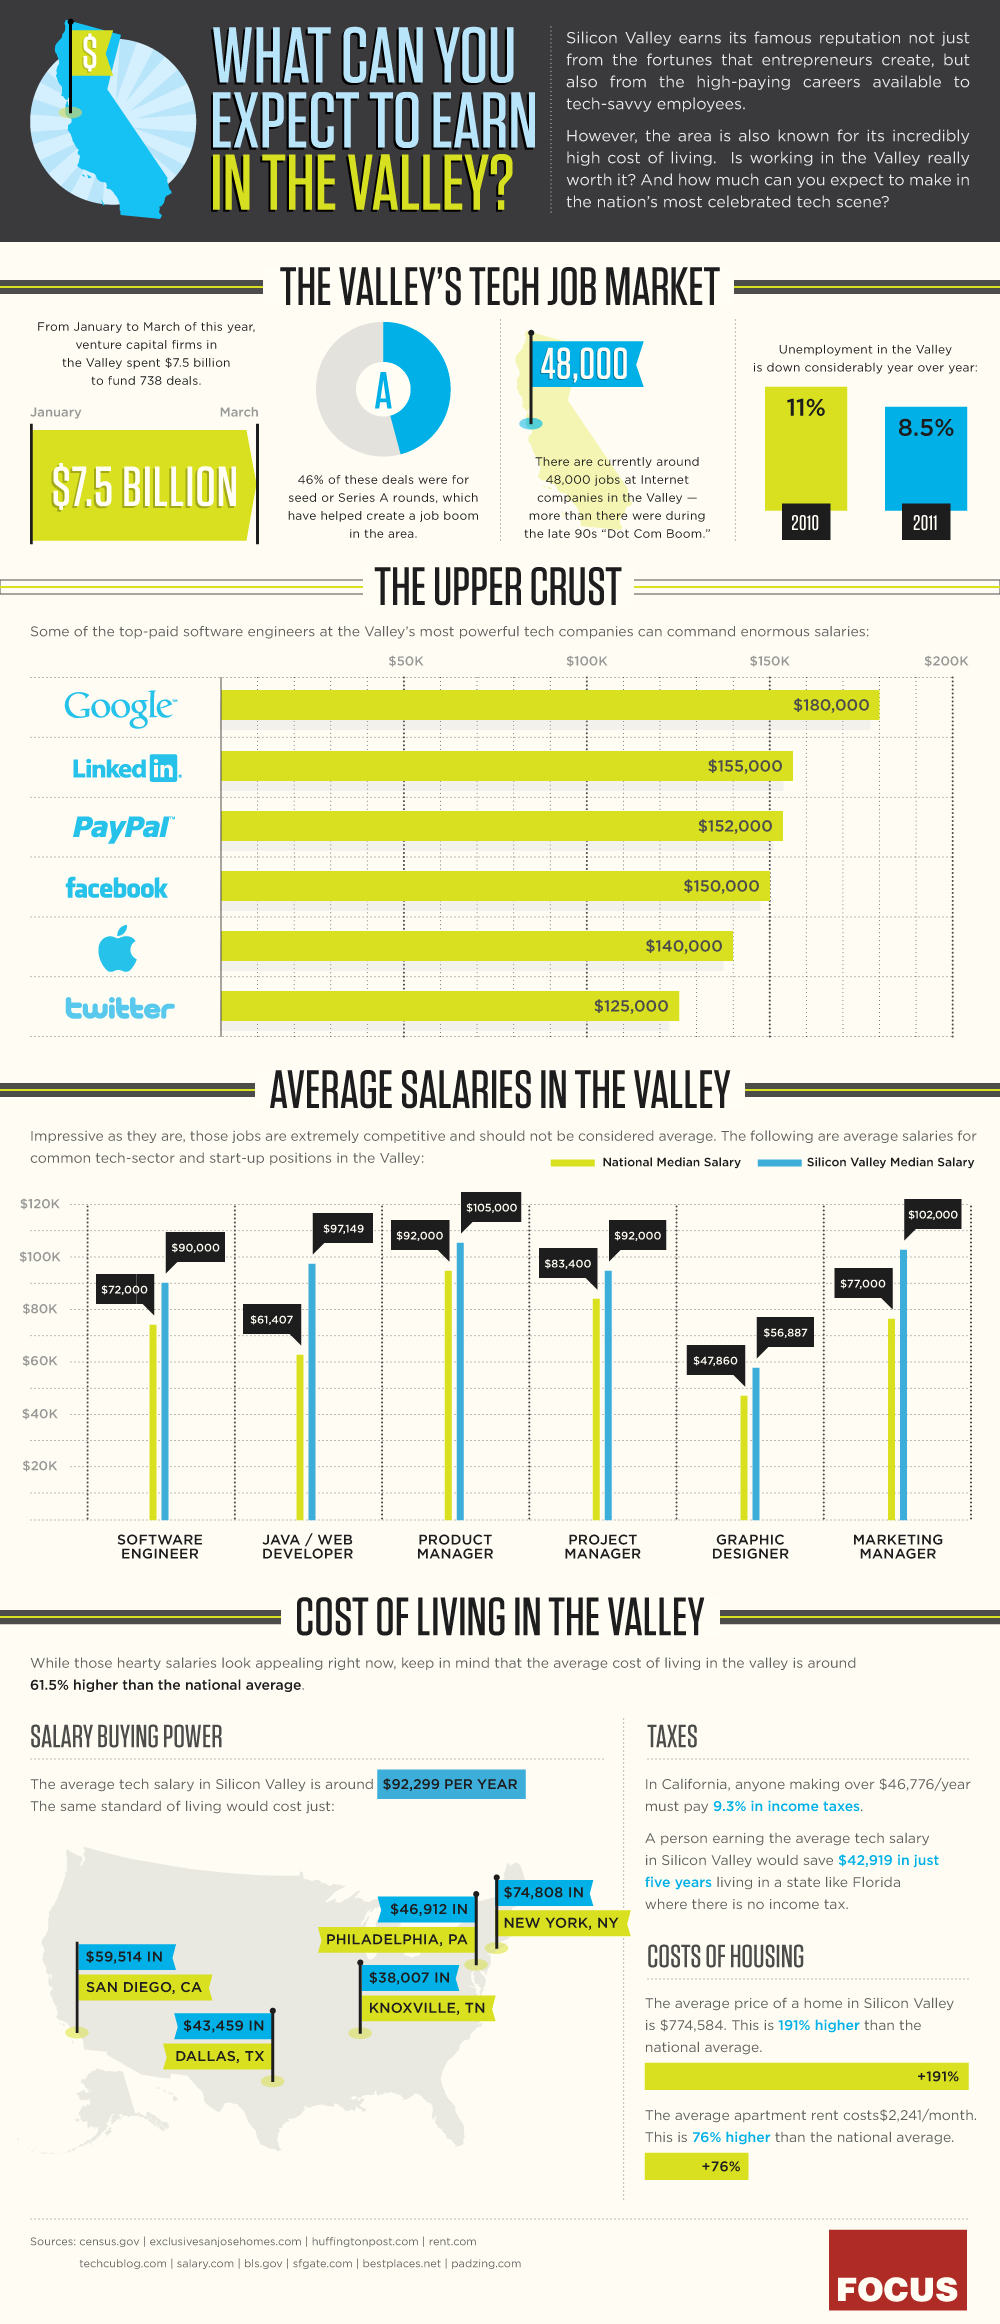 How much does it cost to live in Silicon Valley?